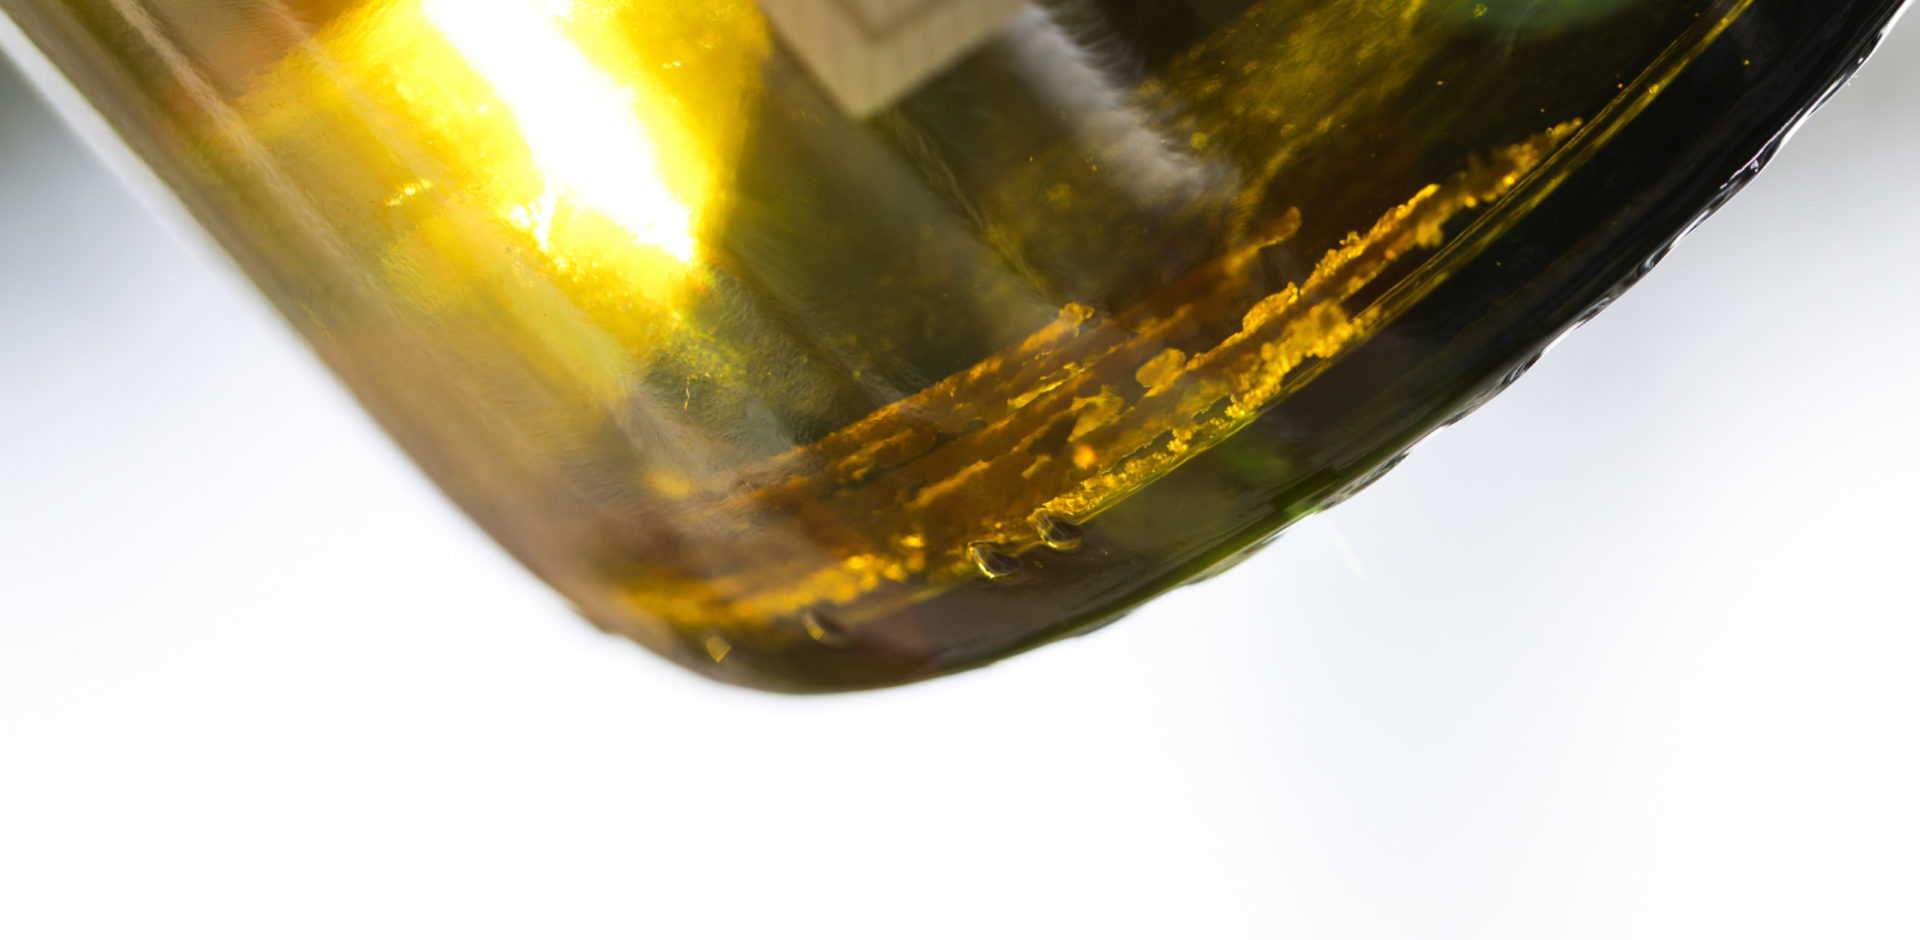 chardonnay bottle with tartrates at the bottom of bottle